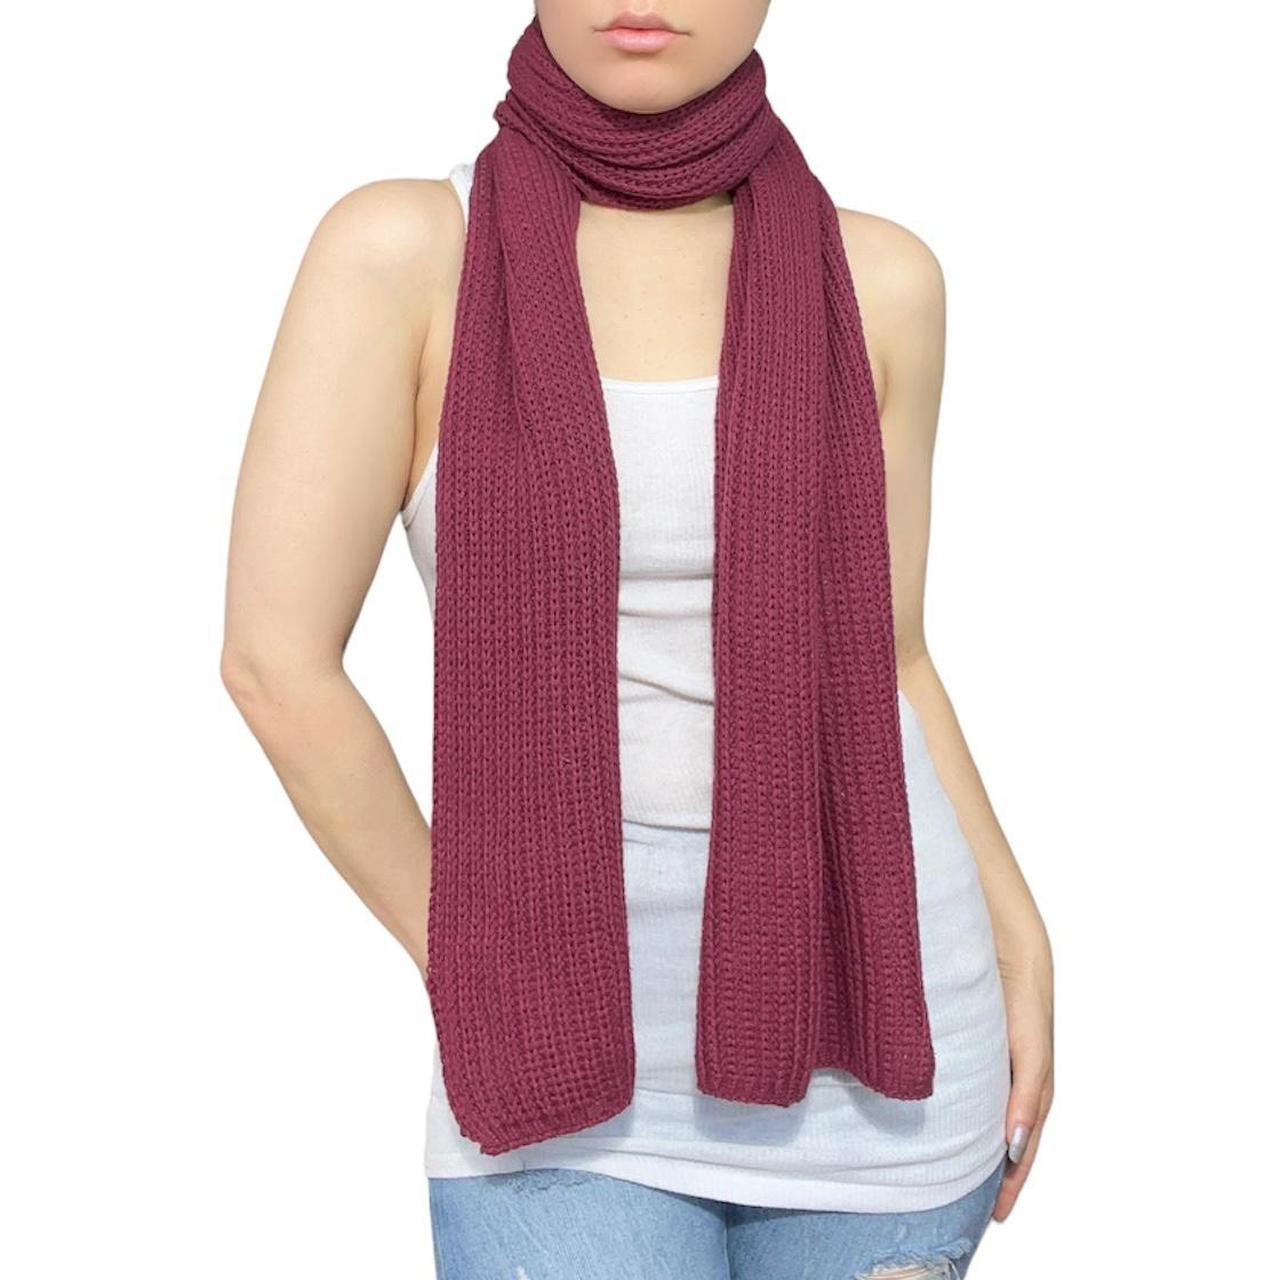 American Apparel Women's Burgundy and Red Scarf-wraps